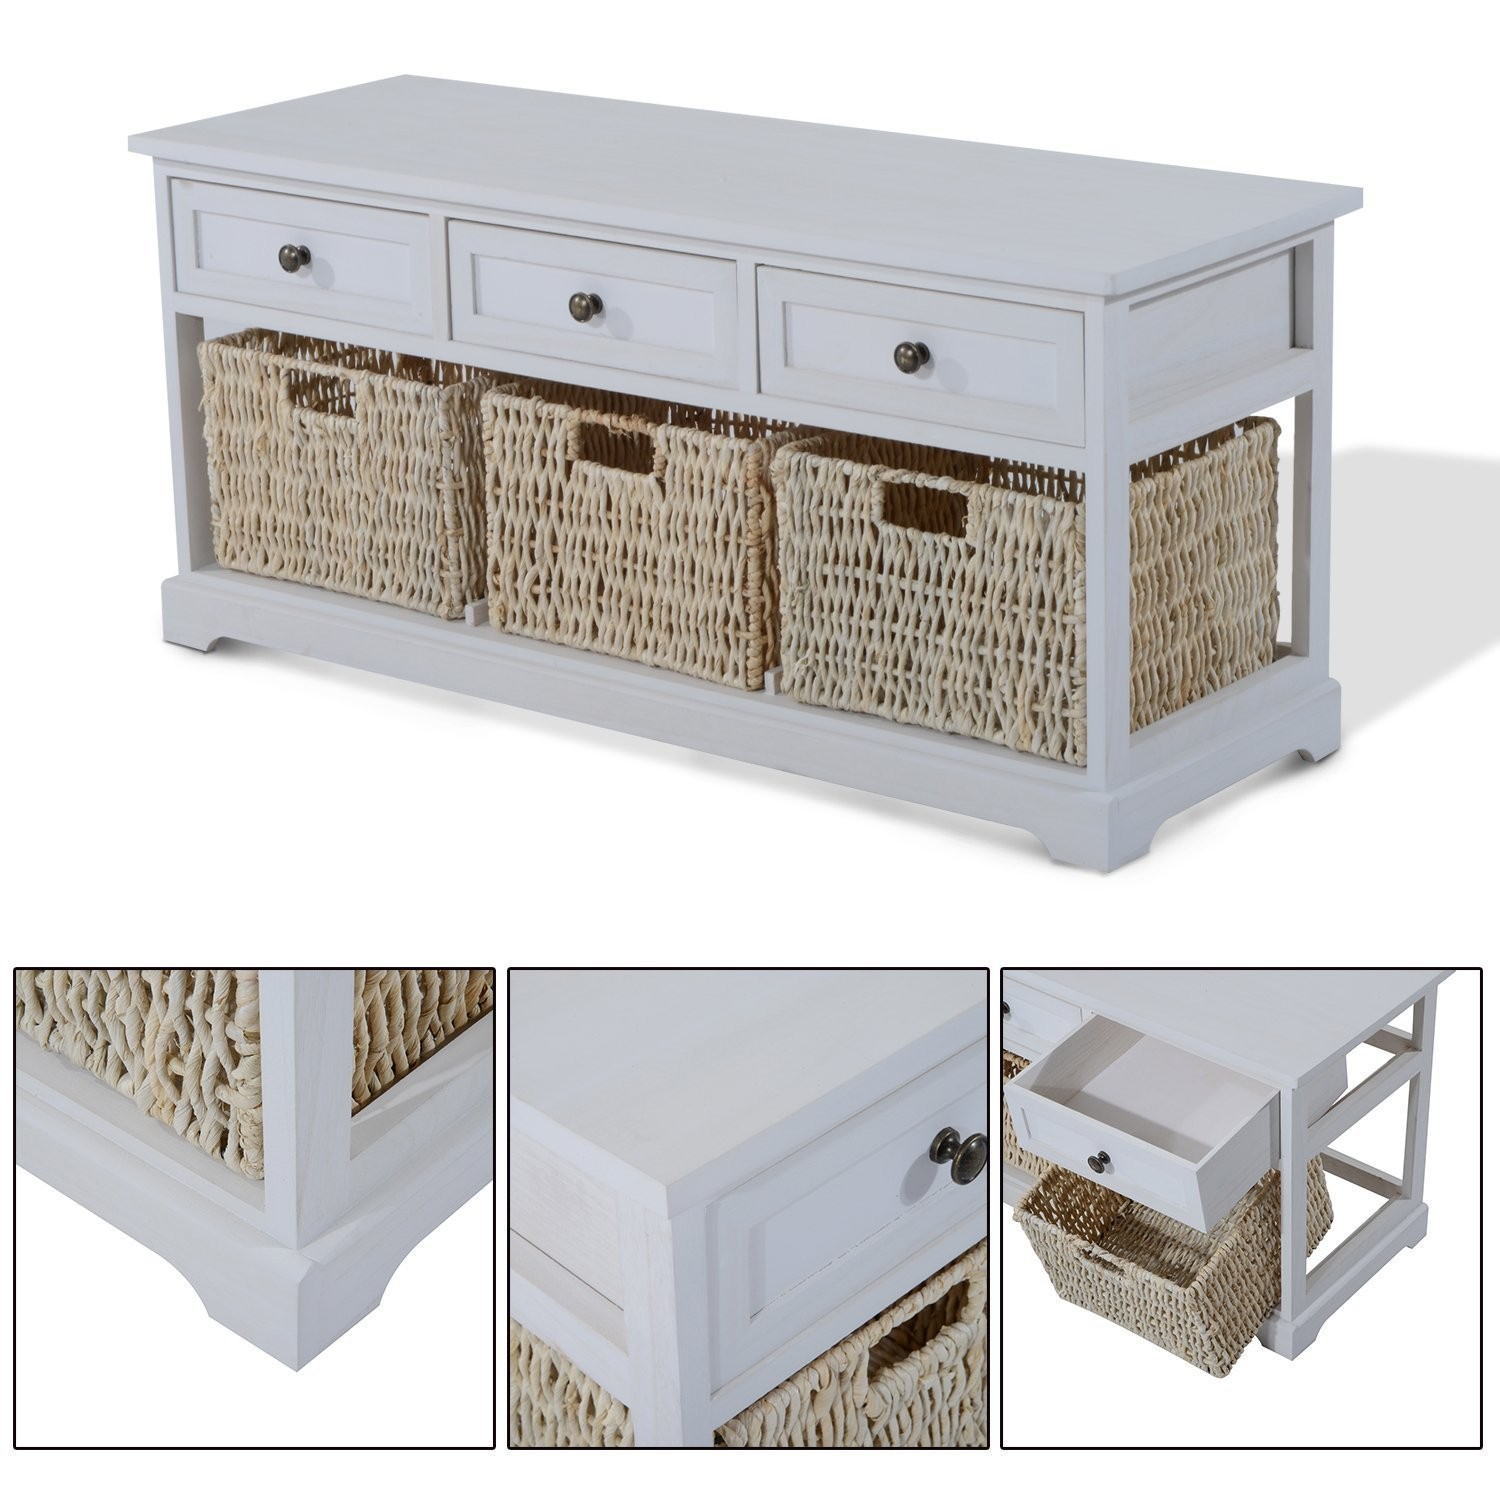 Wooden Coffee Table With Seagrass Wicker Storage Baskets Ideal intended for dimensions 1500 X 1500